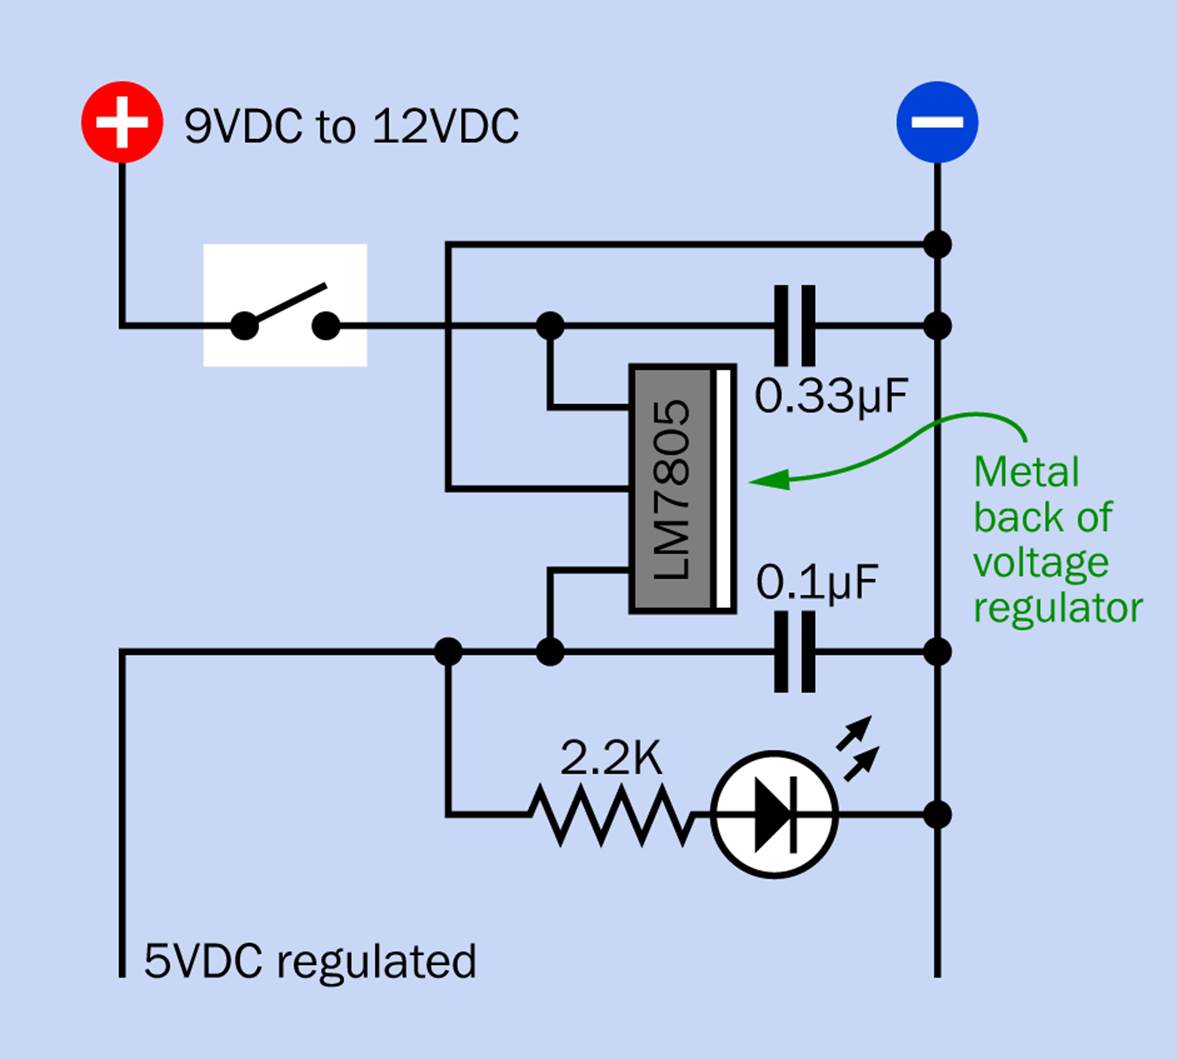 Schematic for the 5VDC regulated power supply.